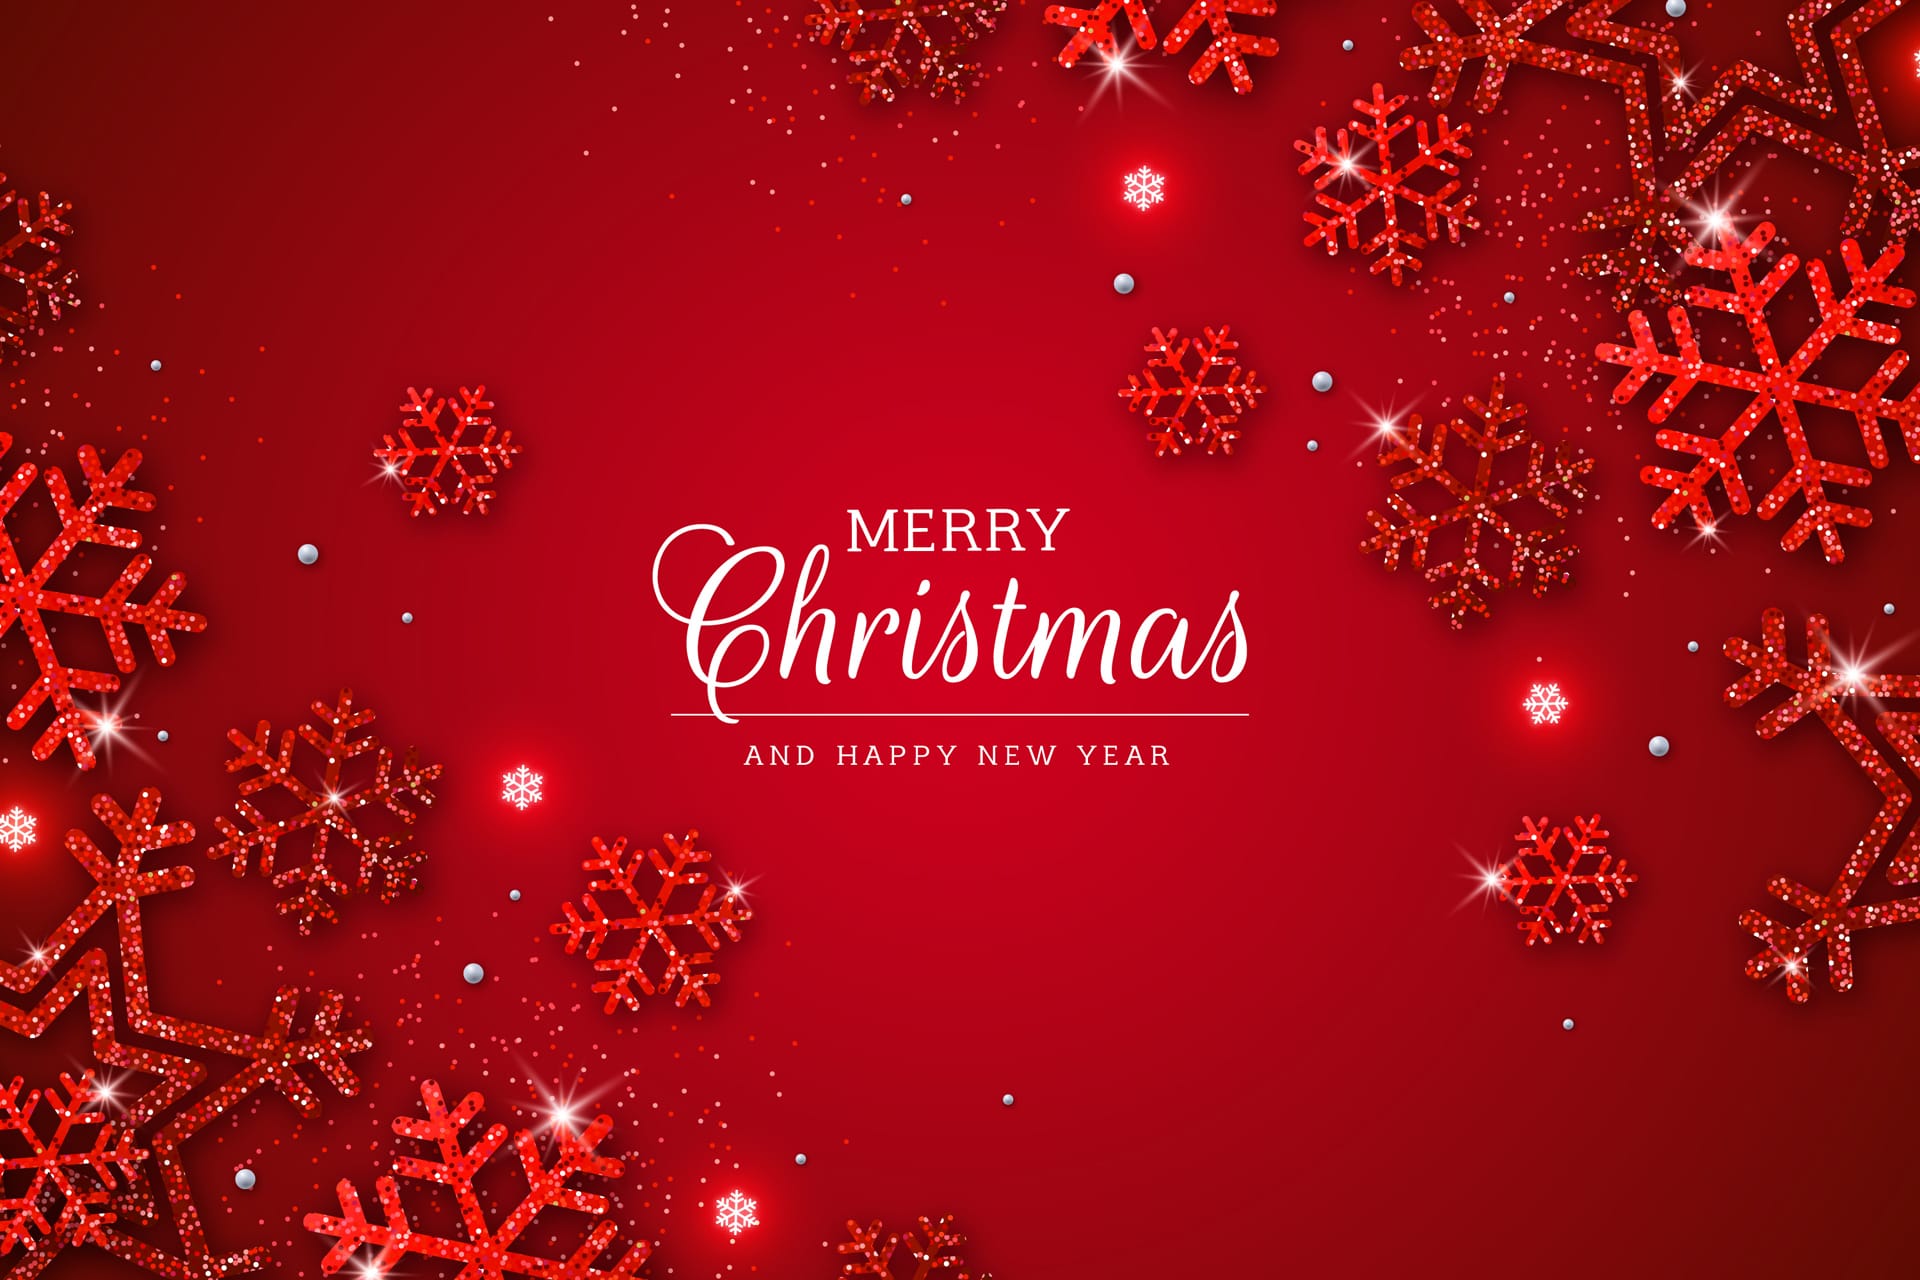 Christmas background with glitter effect image